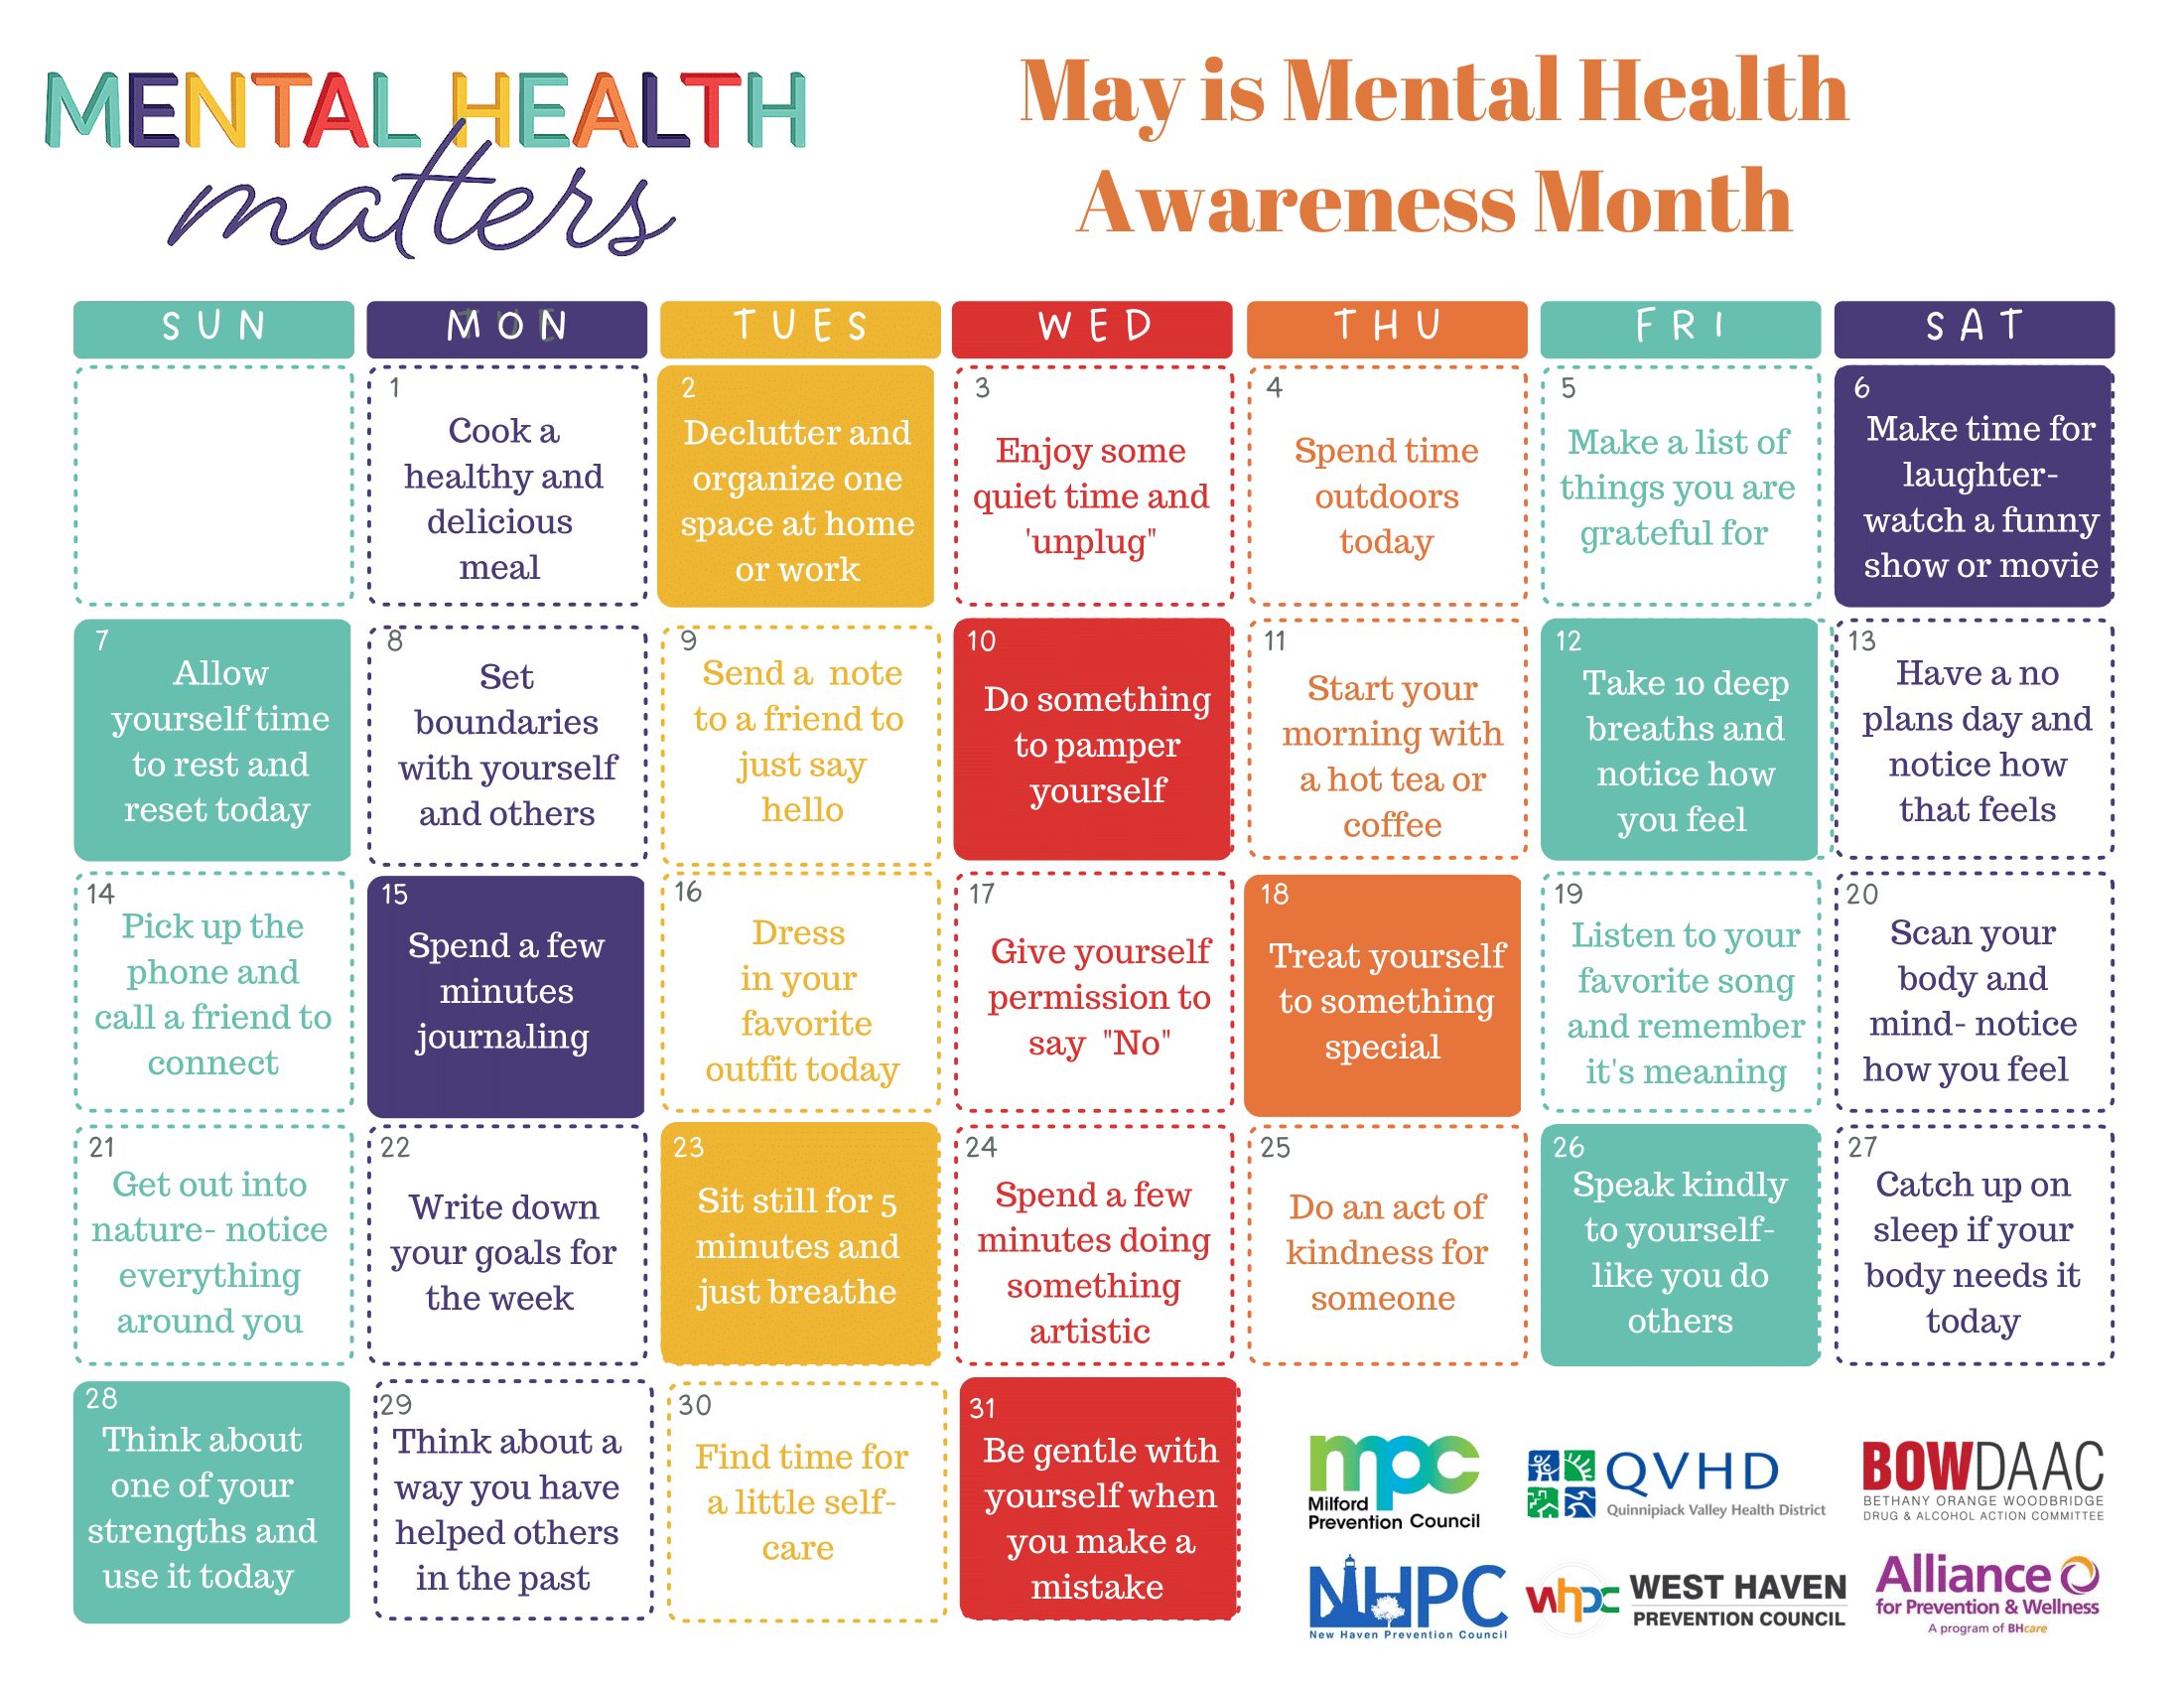 “Mental Health Matters” May Calendar — Alliance for Prevention and Wellness